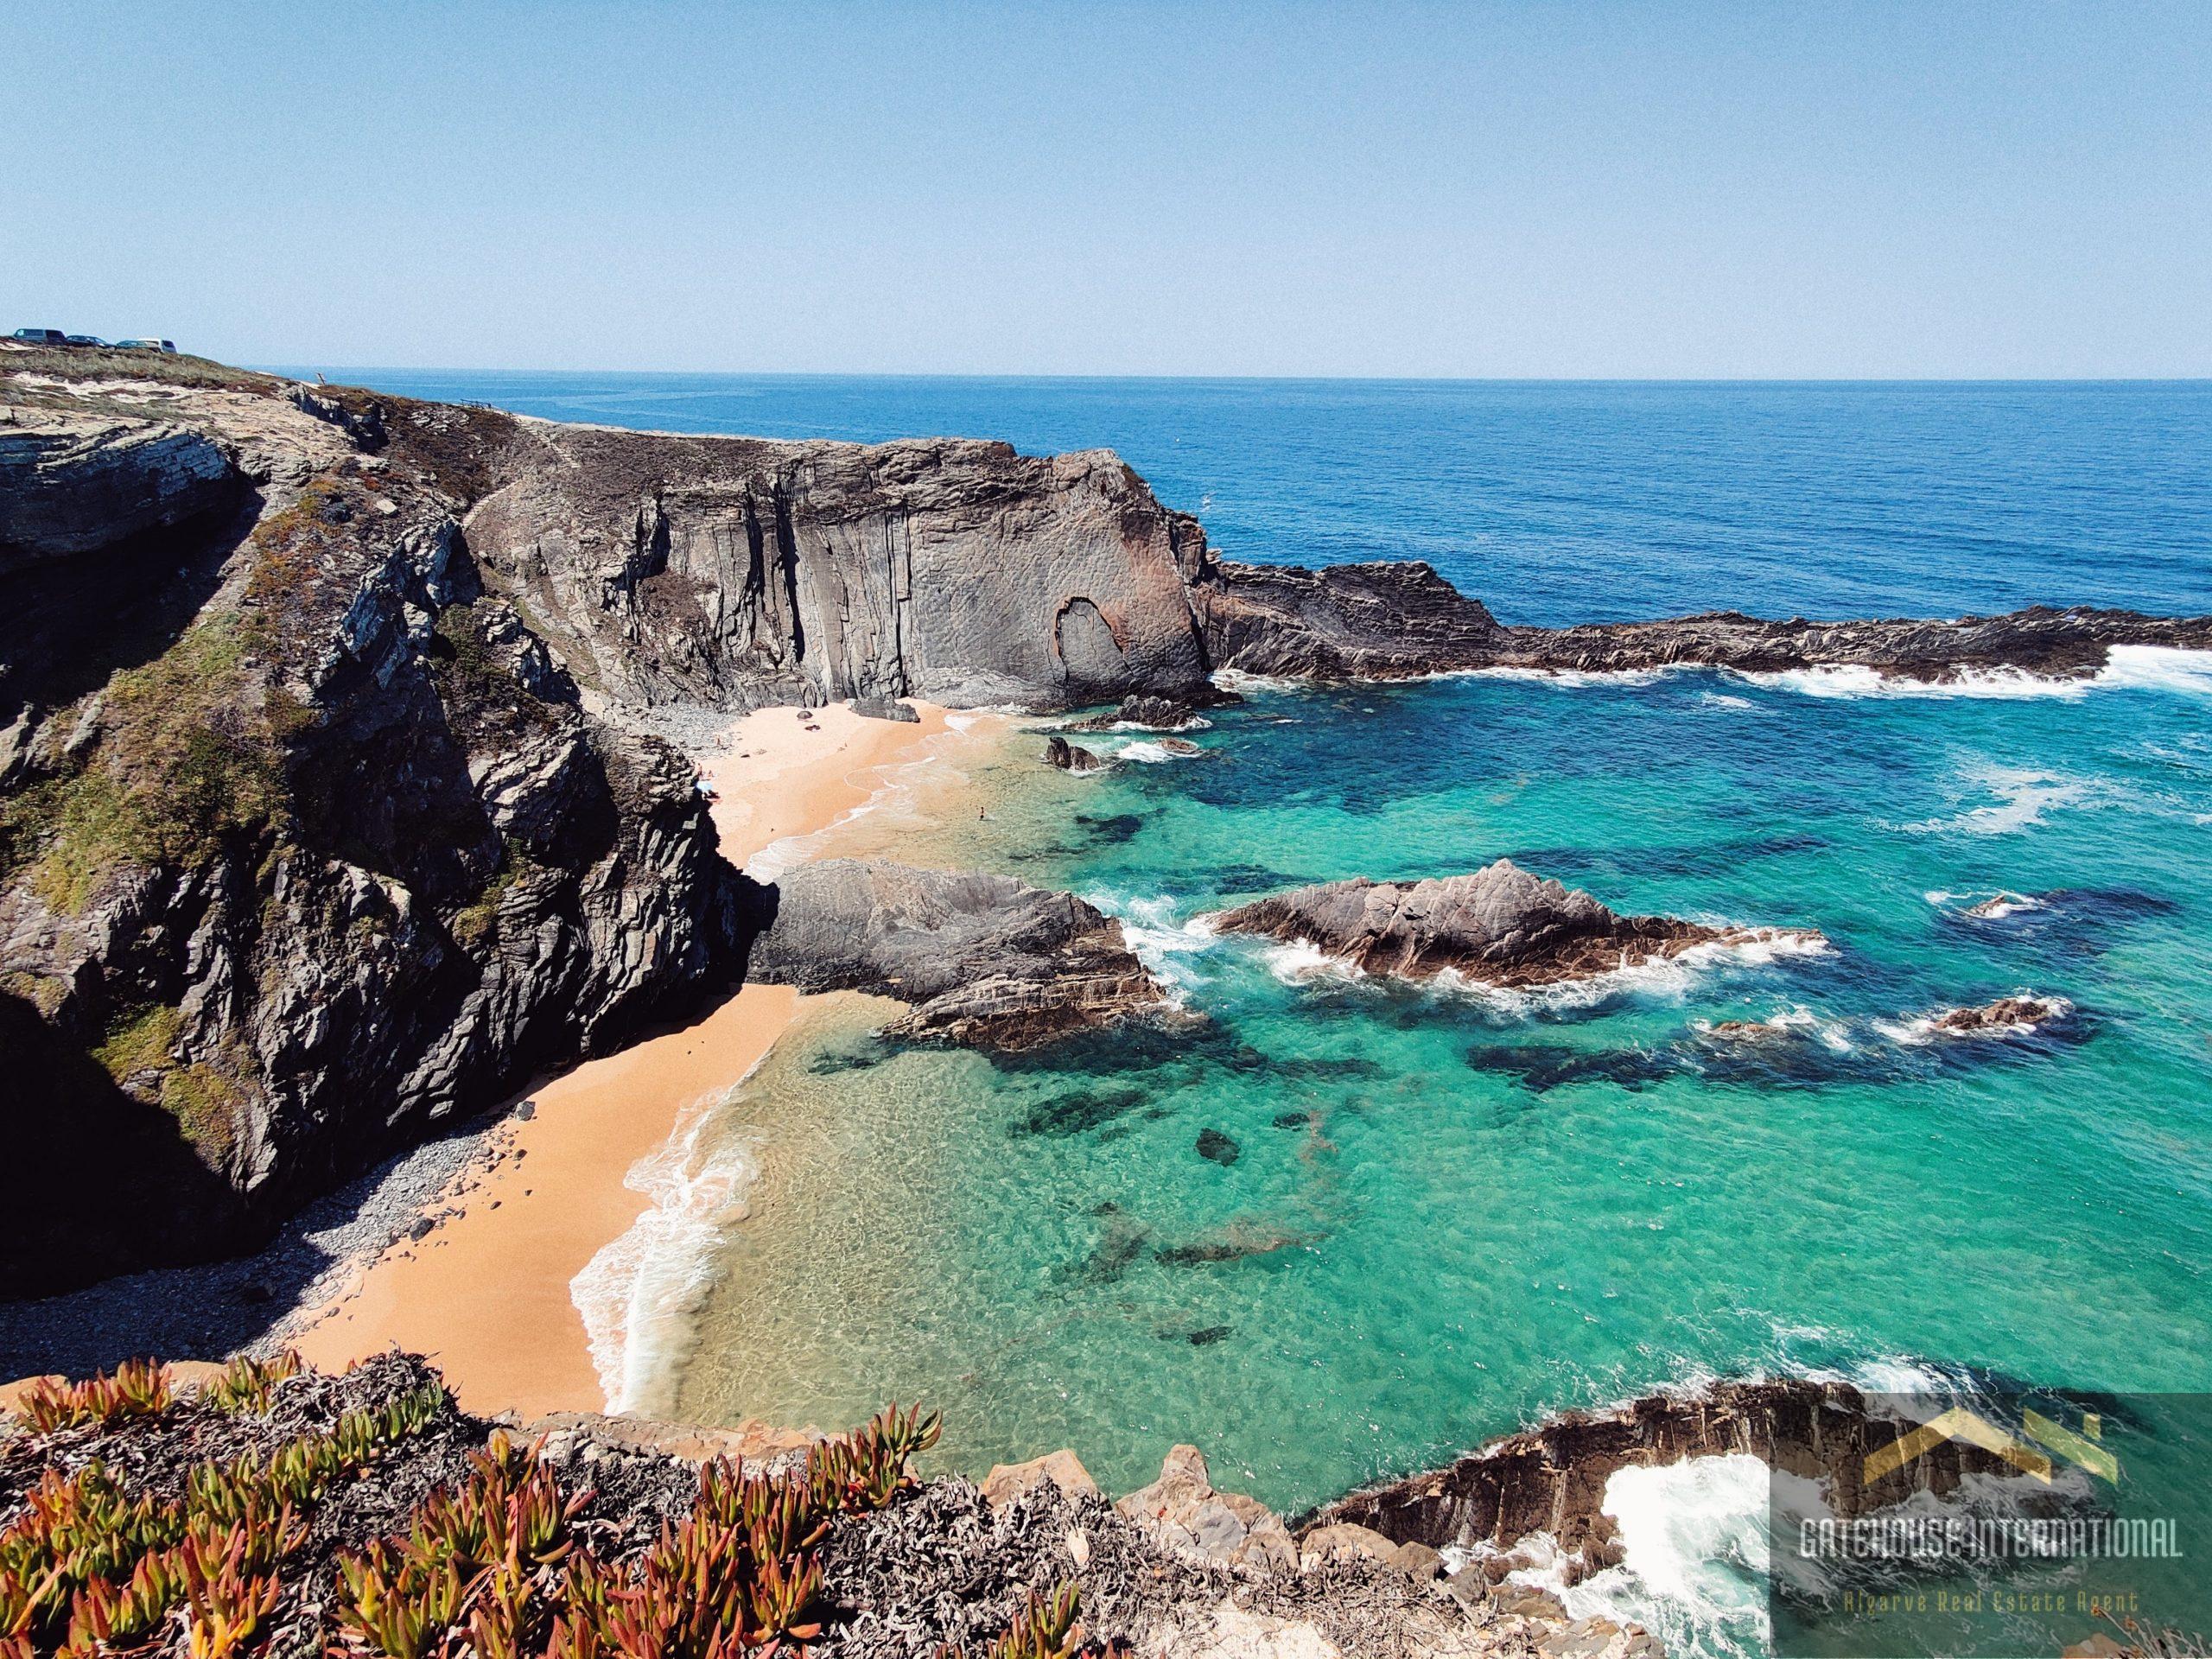 Alentejo has some of the most beautiful beaches in Portugal